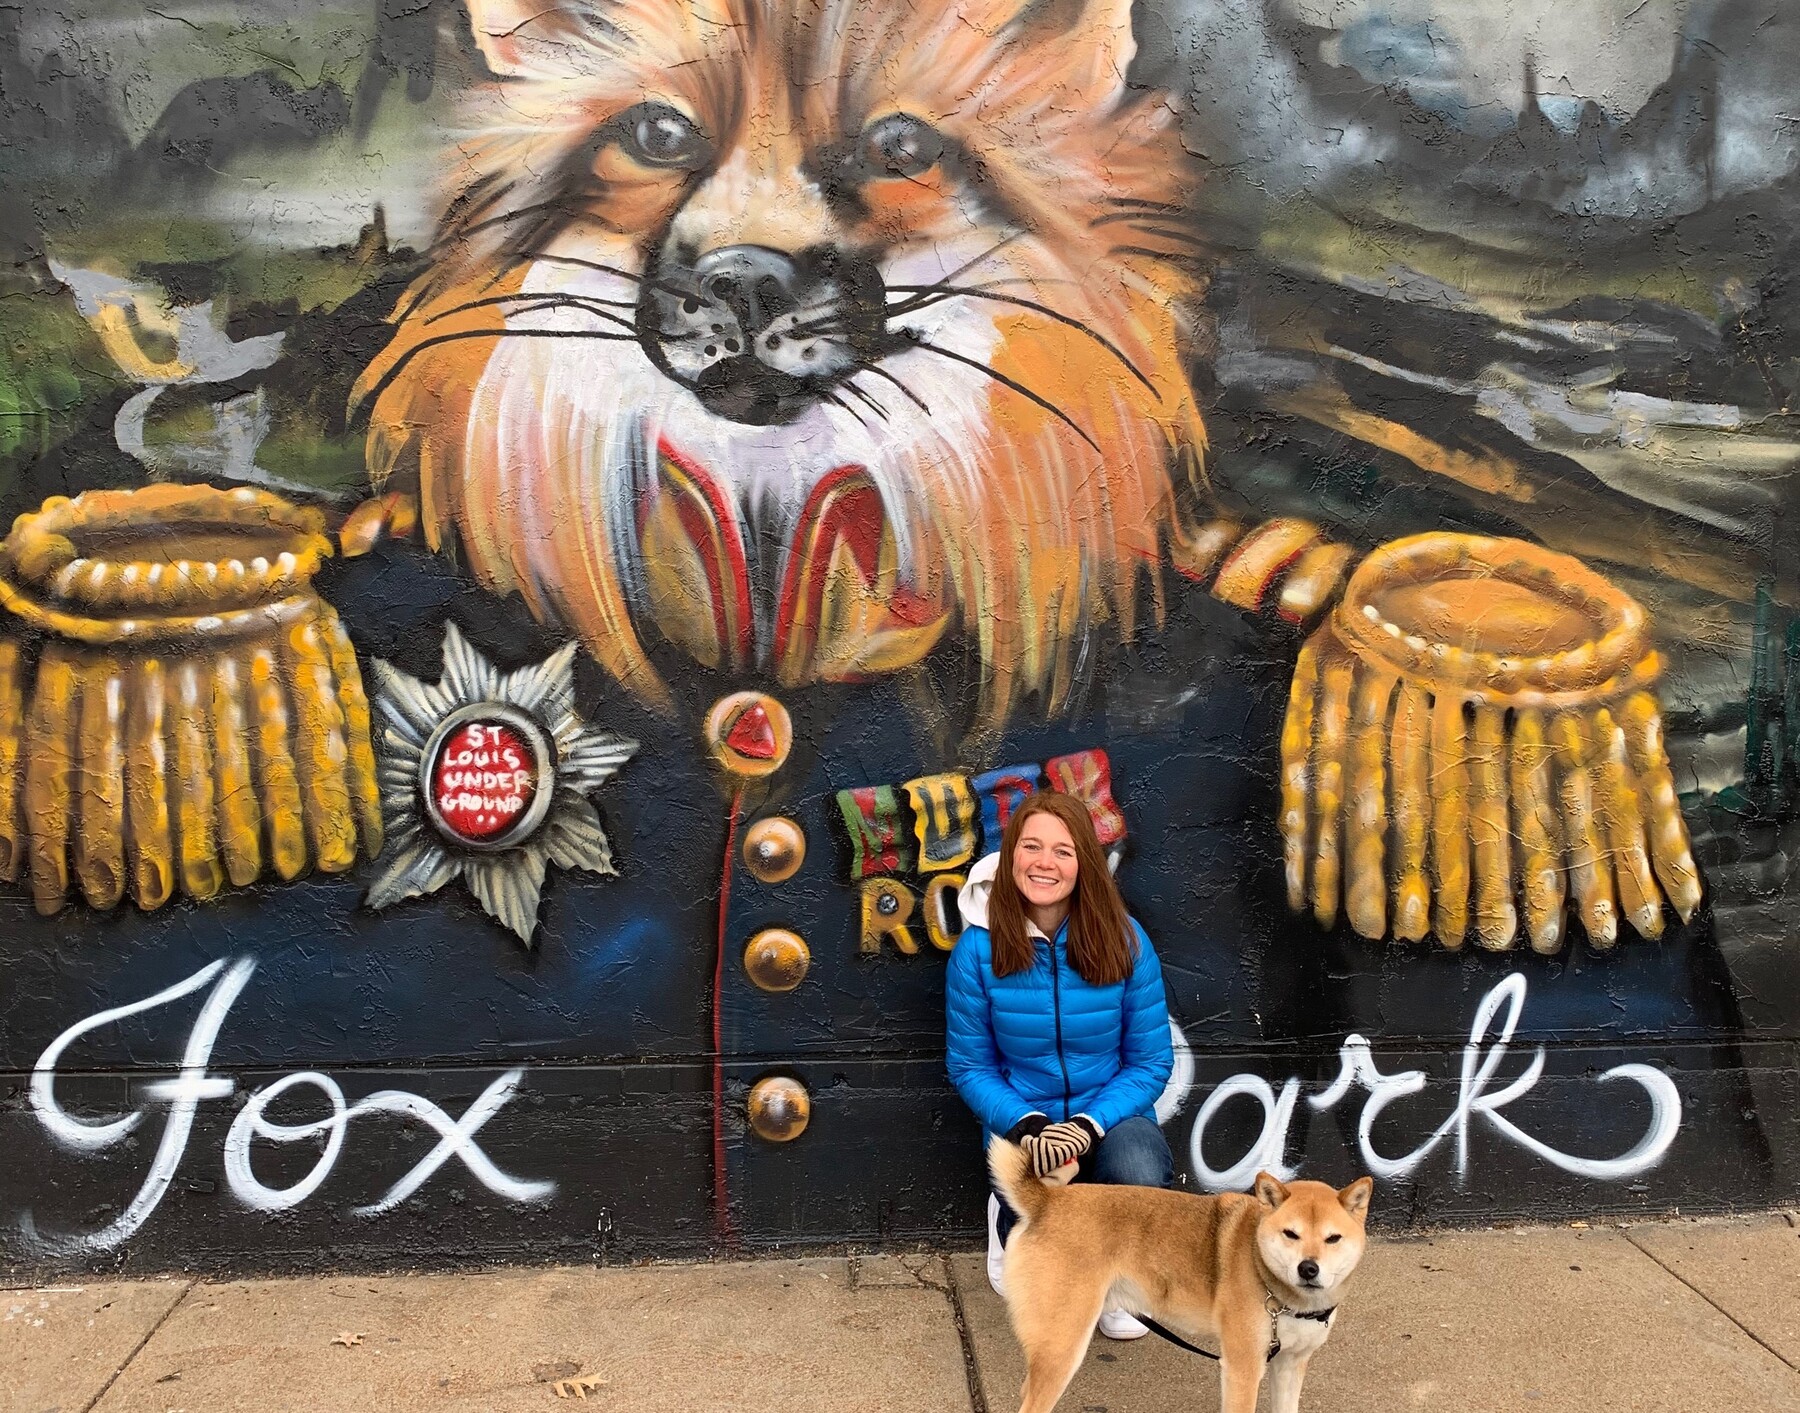 Dr. Magic Wade pictured with her dog in front of a painted mural of a fox on a brick wall